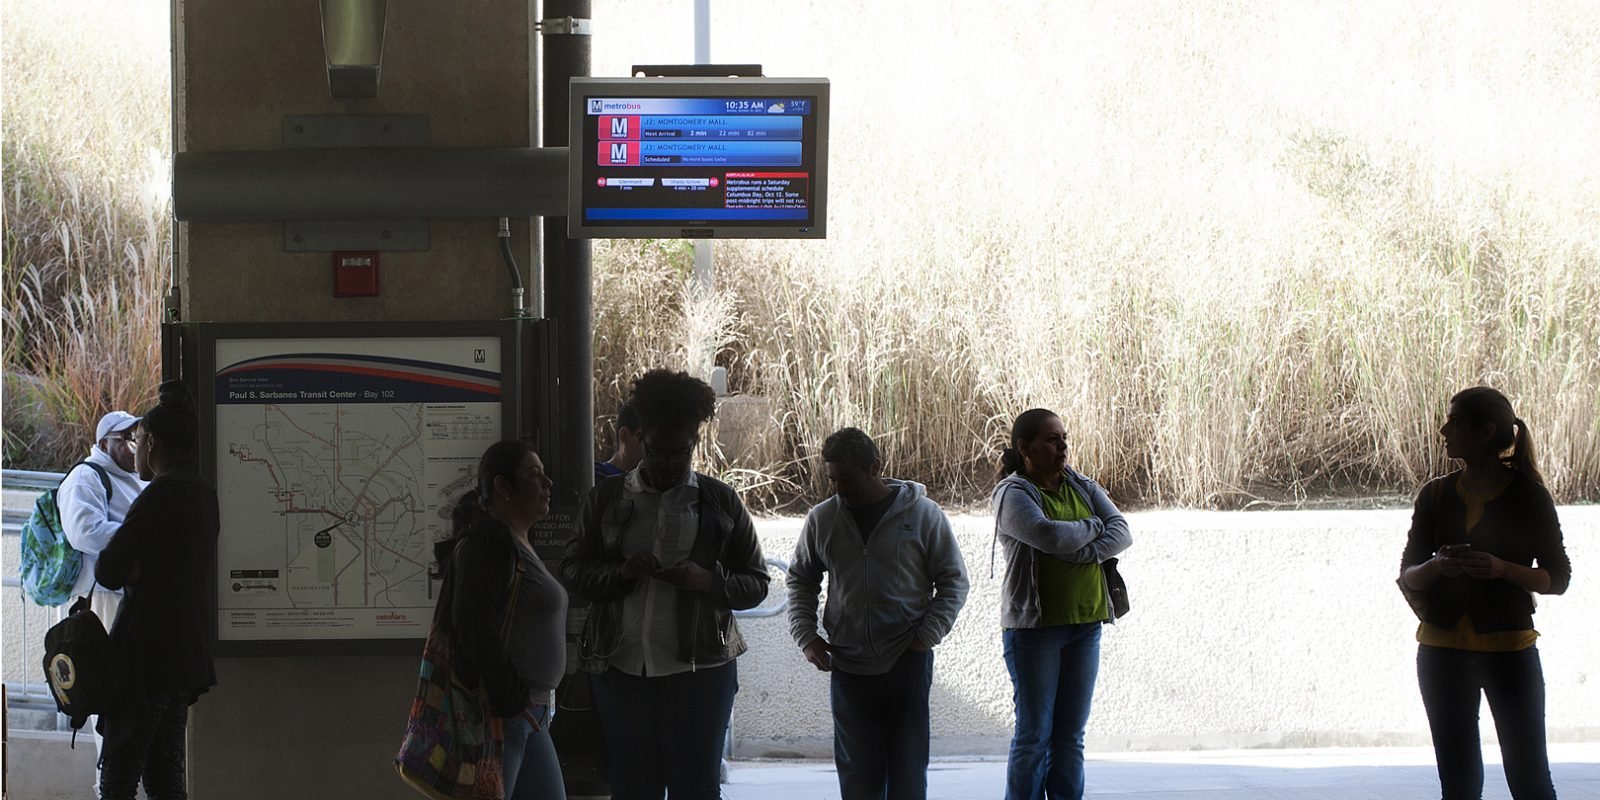 Picture of people at a train station with Redmon transit display